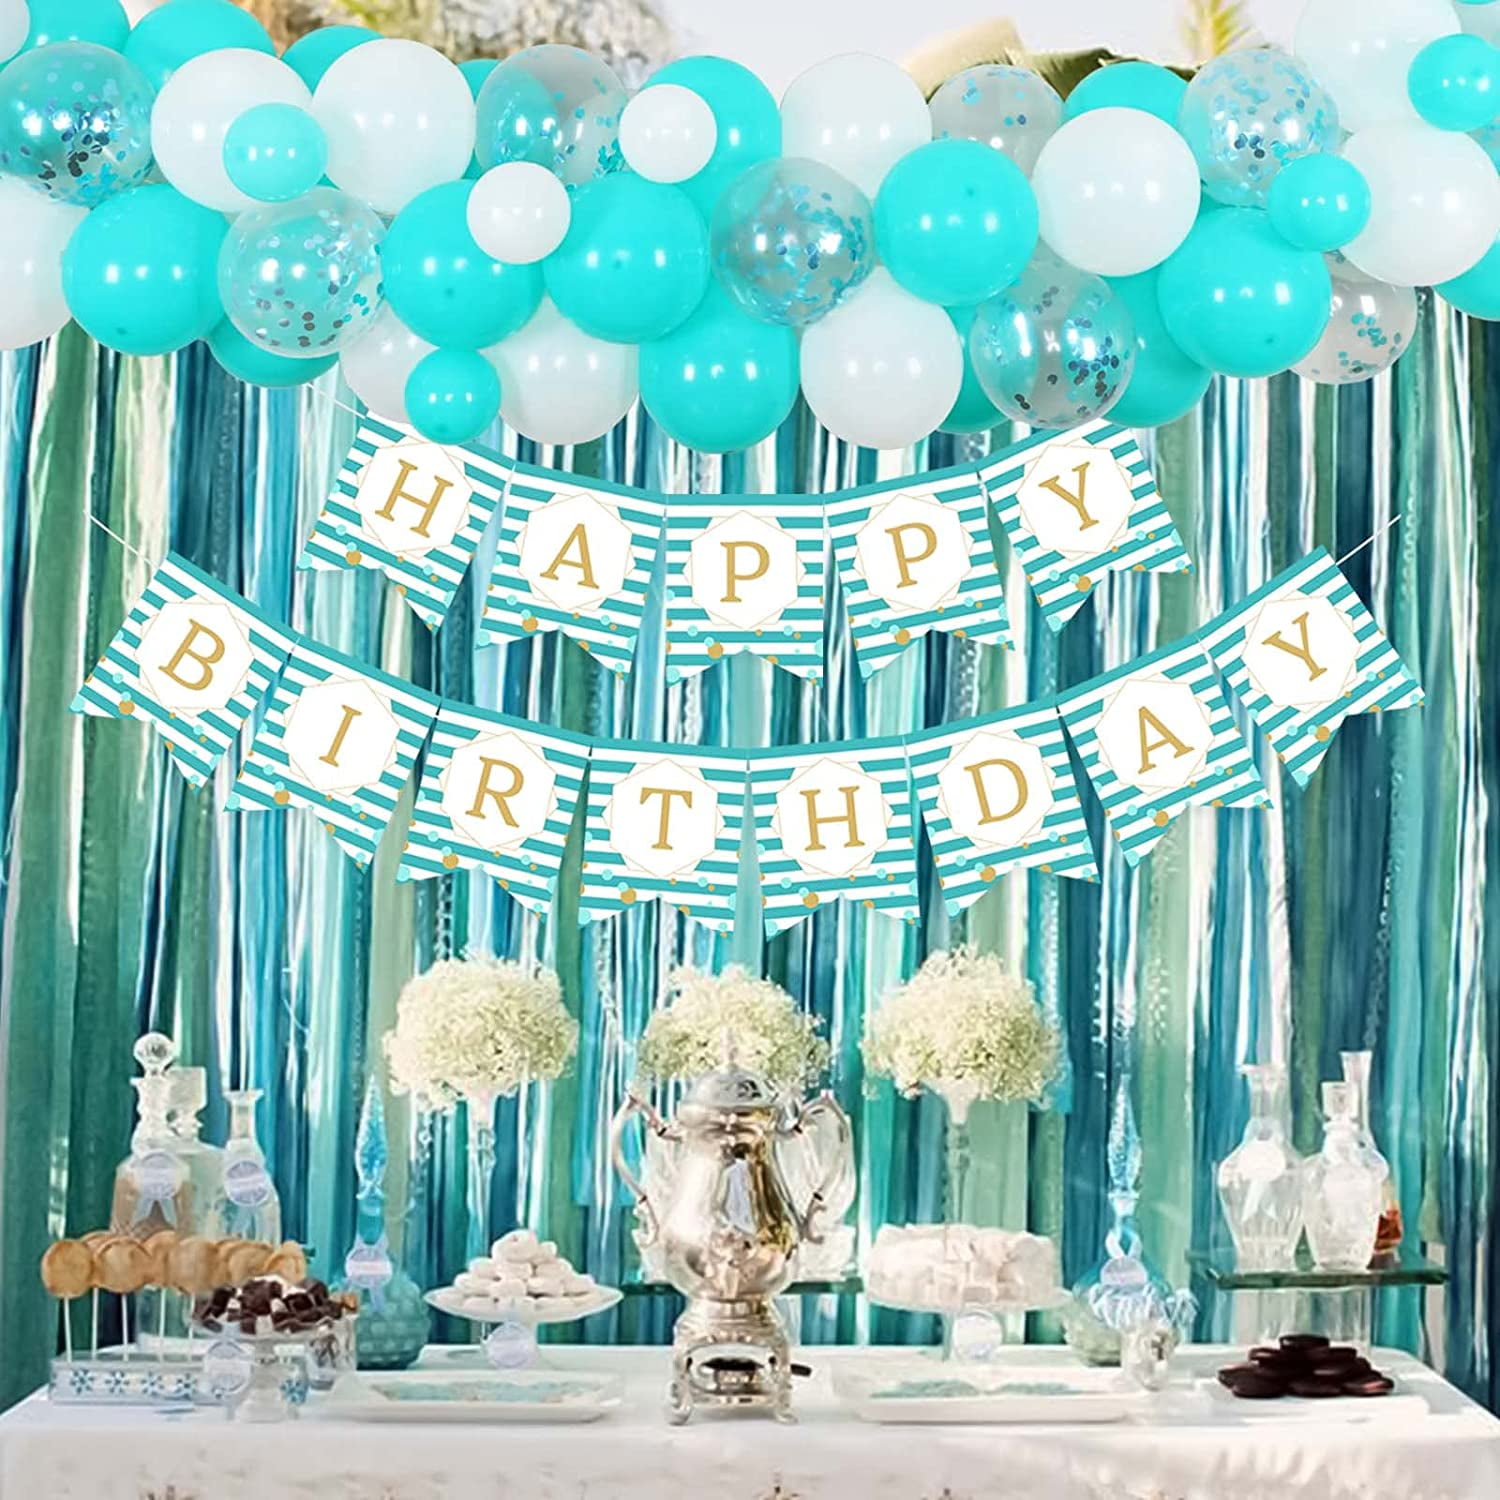  Navy Blue 13th Birthday Decorations for Boys and Girls, Happy  13th Birthday Backdrop, Tablecloth, Balloons Garland Arch Kit - 13th  Birthday Banner Party Supplies Bday Decor for Sweet 13 Year Old